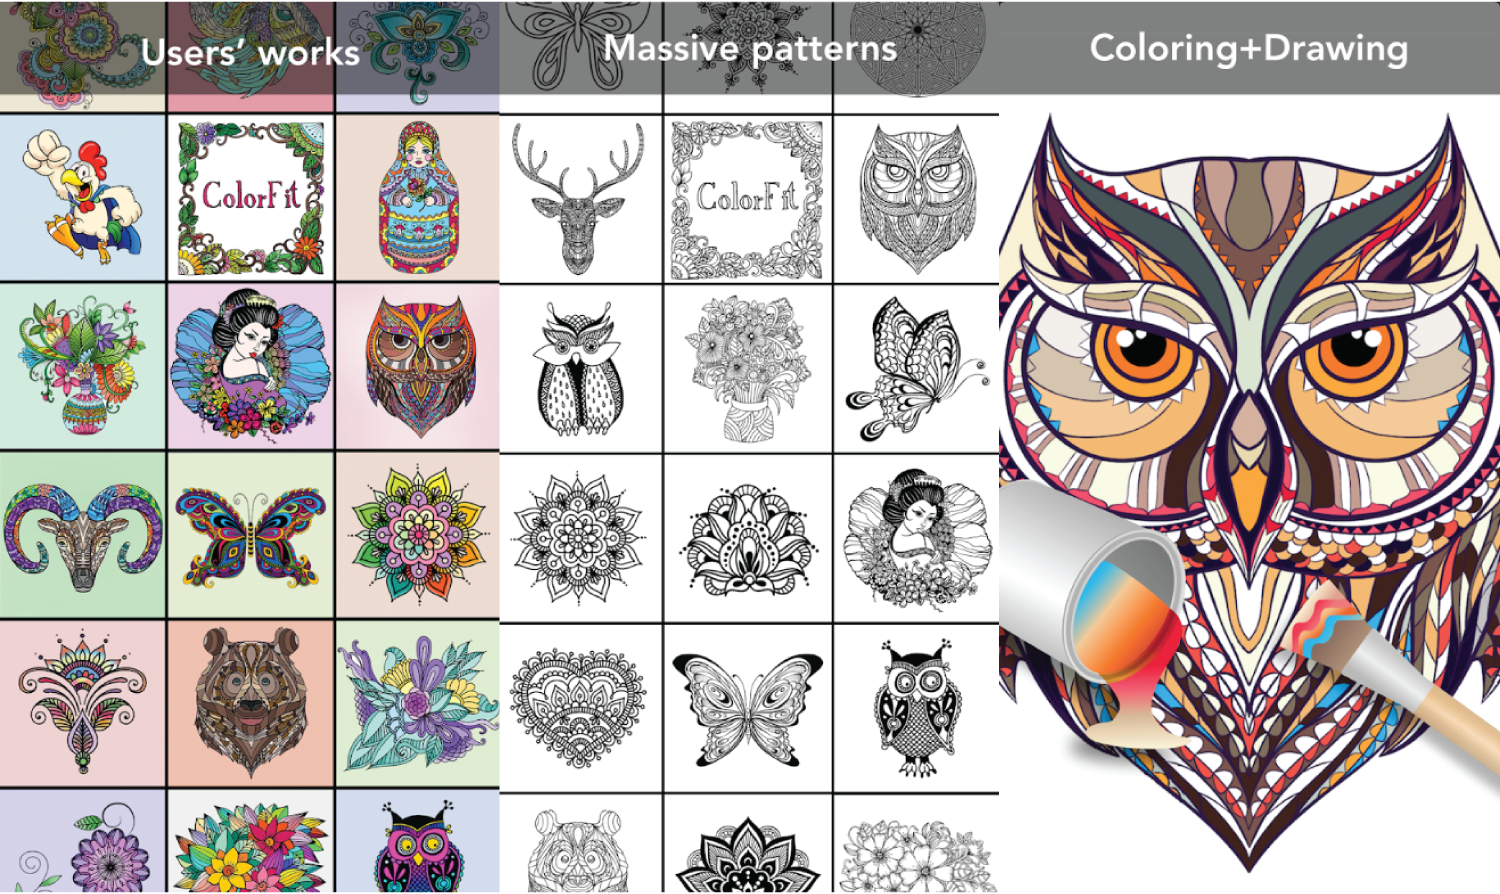 Download Free Coloring App For Kindle Fire | Colorpaints.co